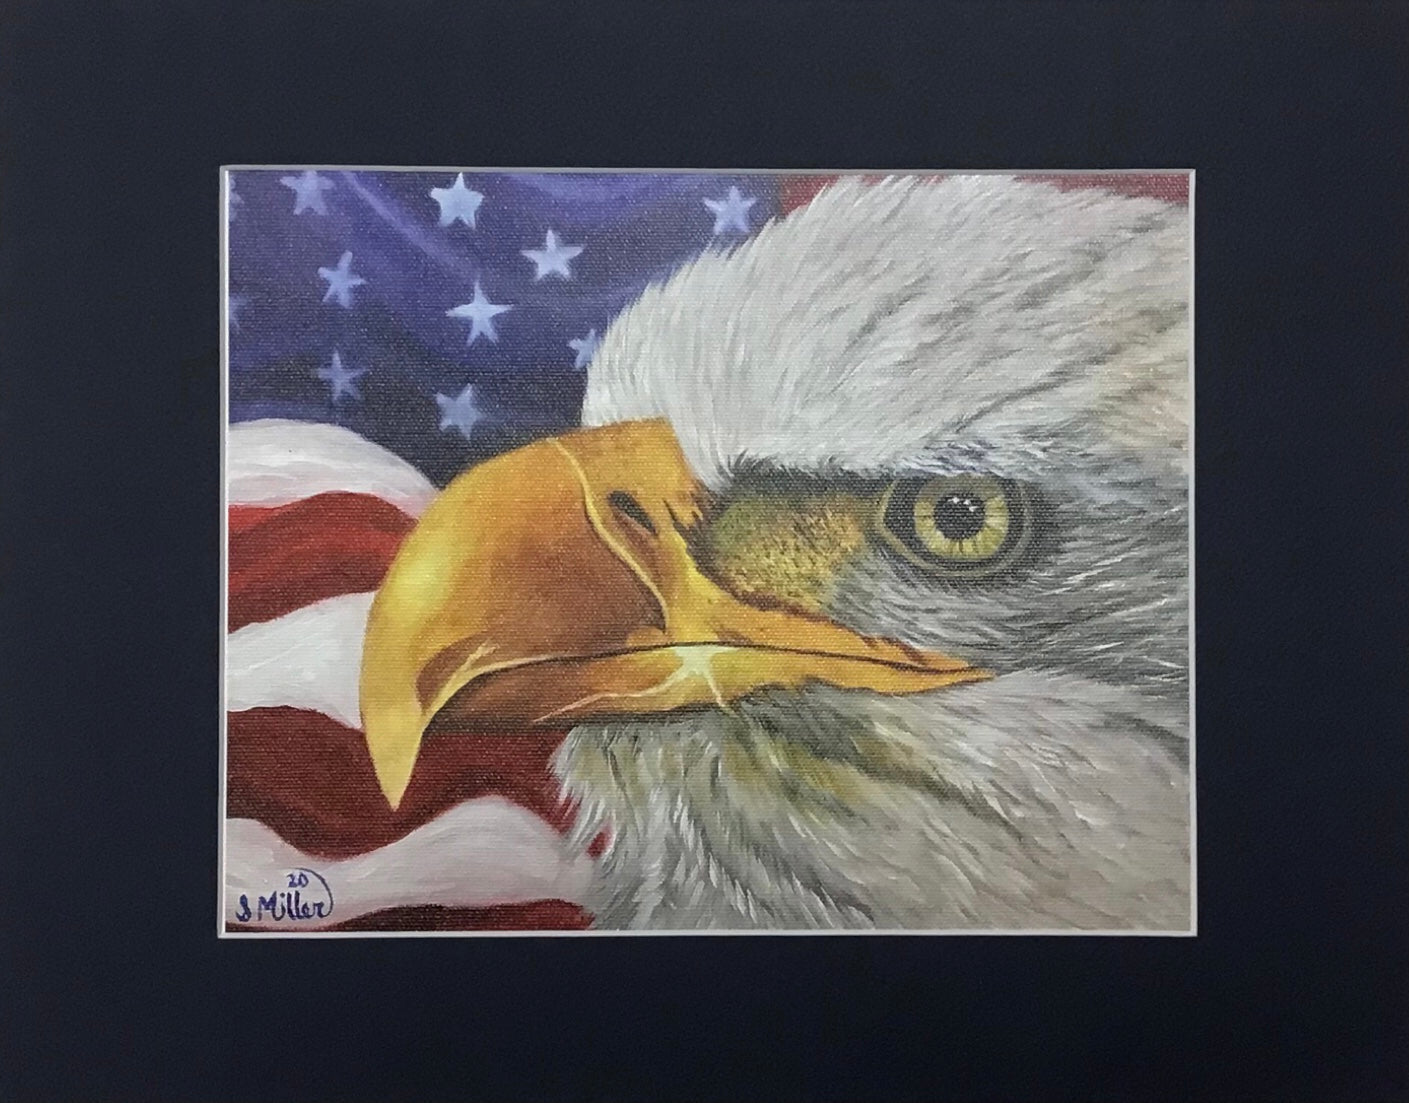 Giclee print of a bald eagle against a waving American flag backdrop, matted in blue